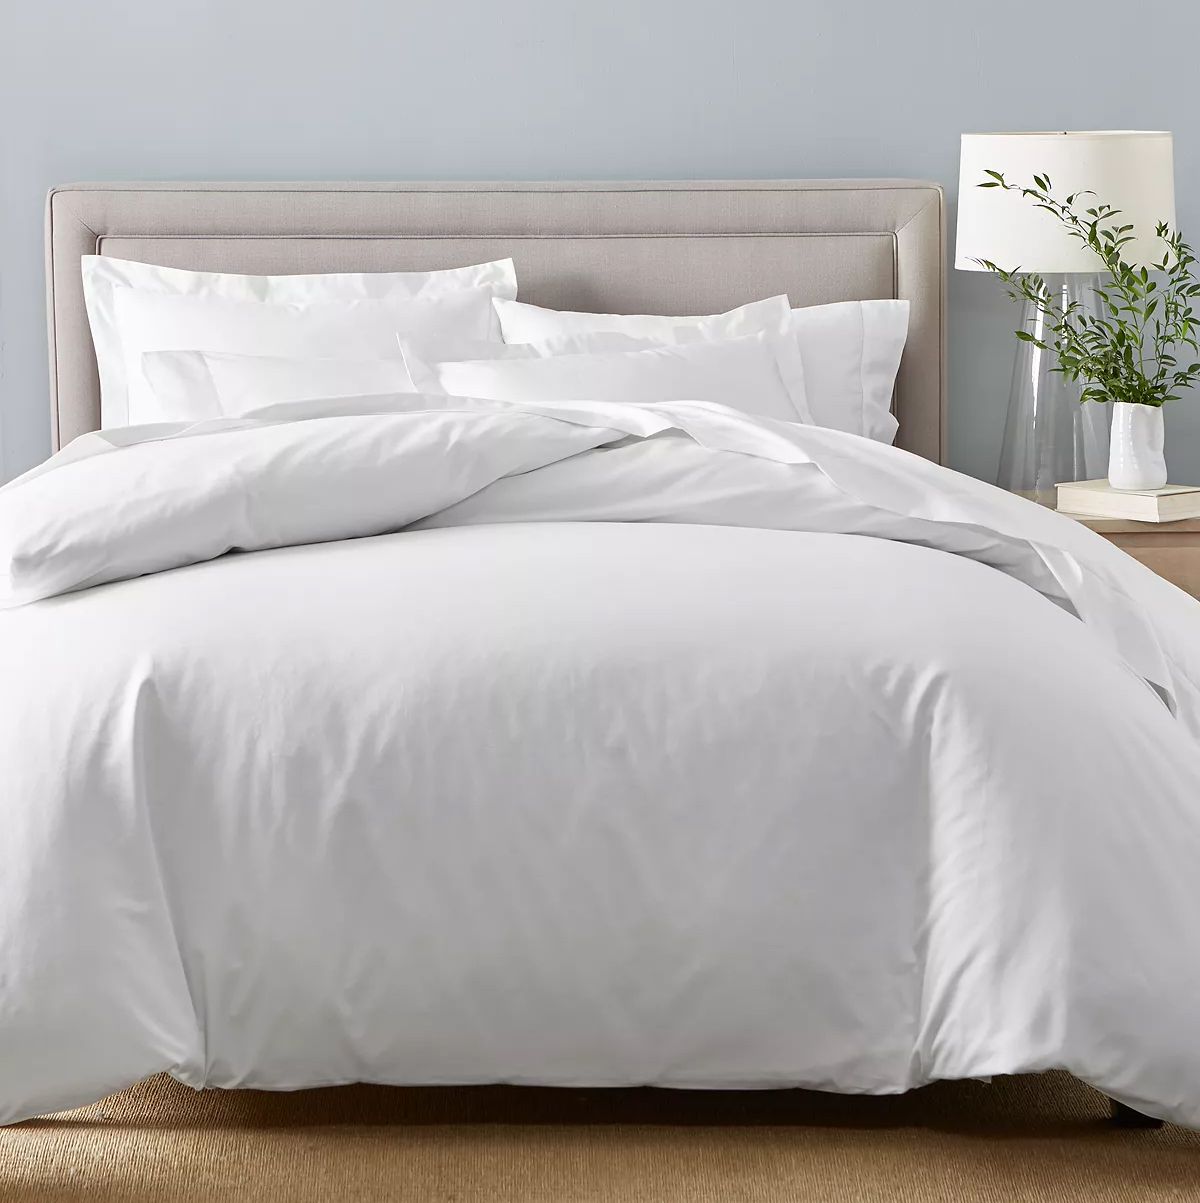 This Under-$50 Bedding Sale Is Too Great to Miss